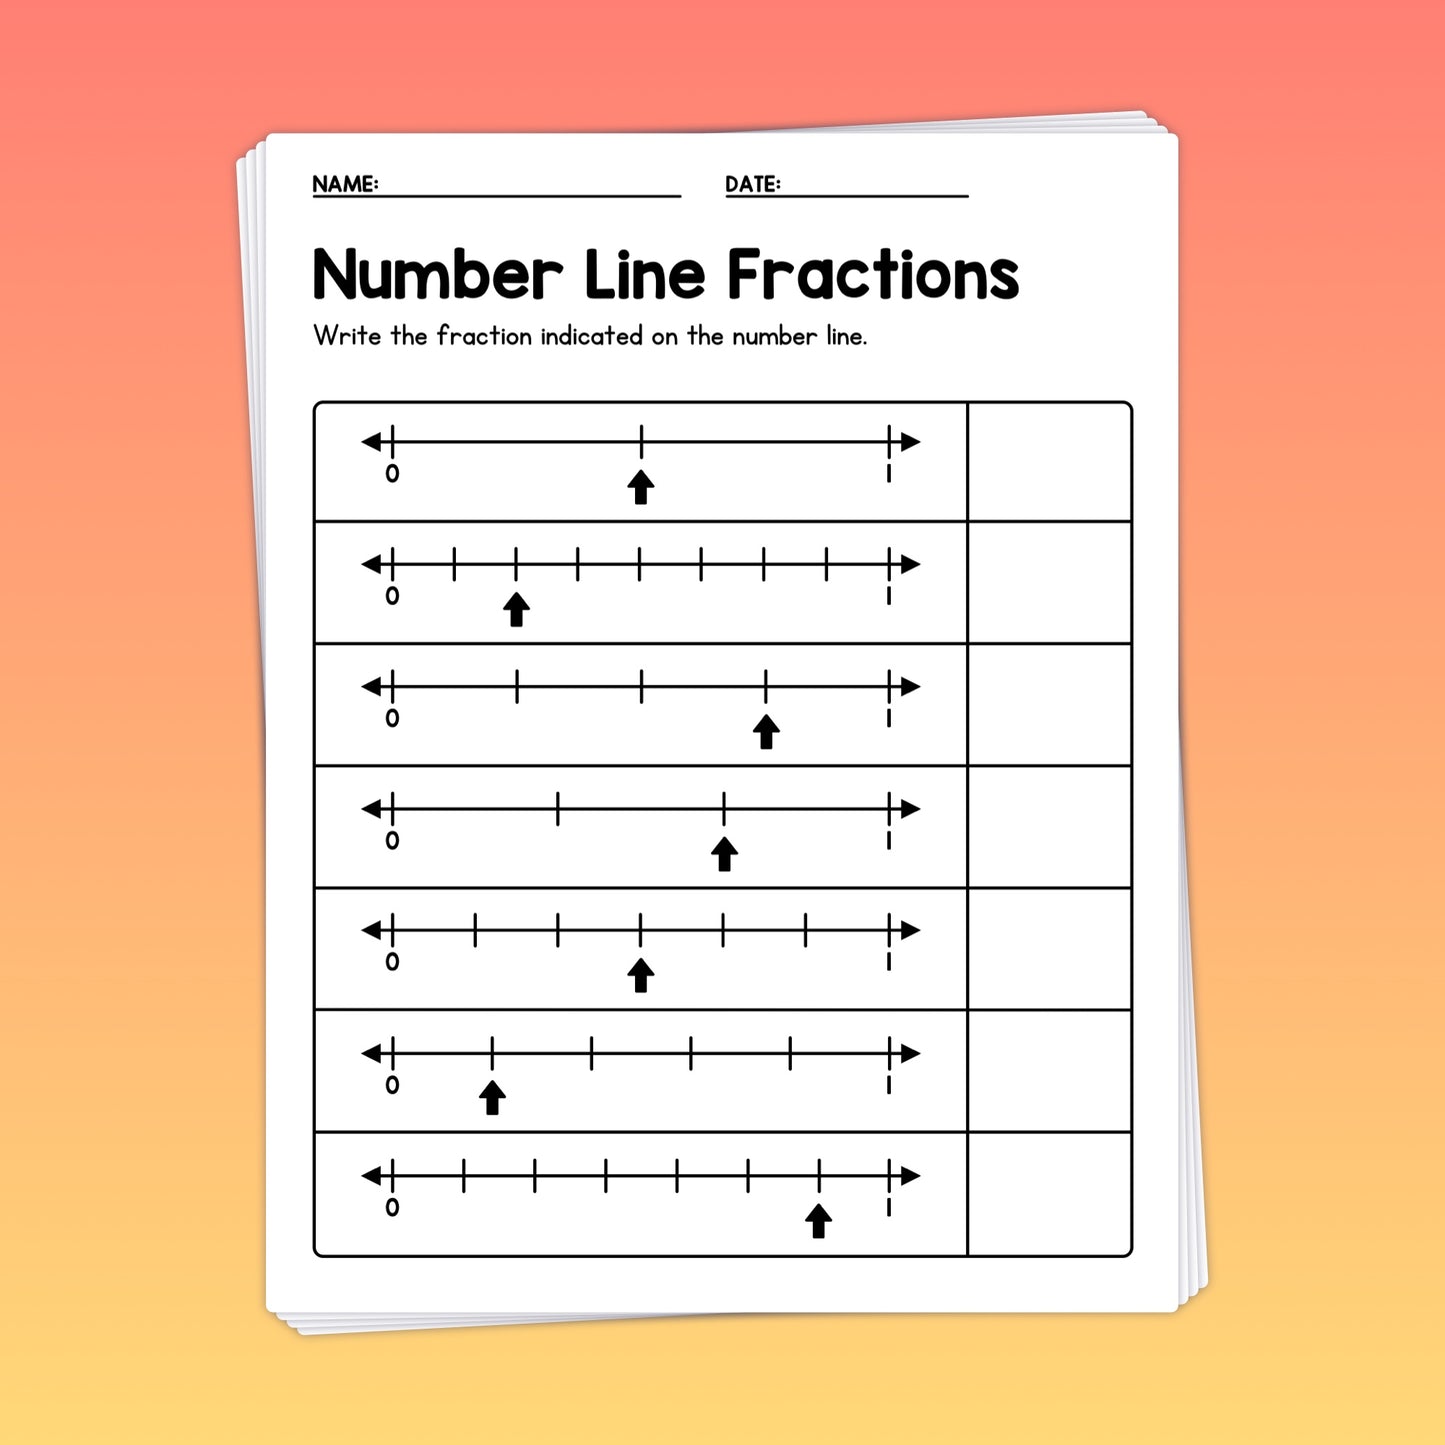 Fractions on a number line printable